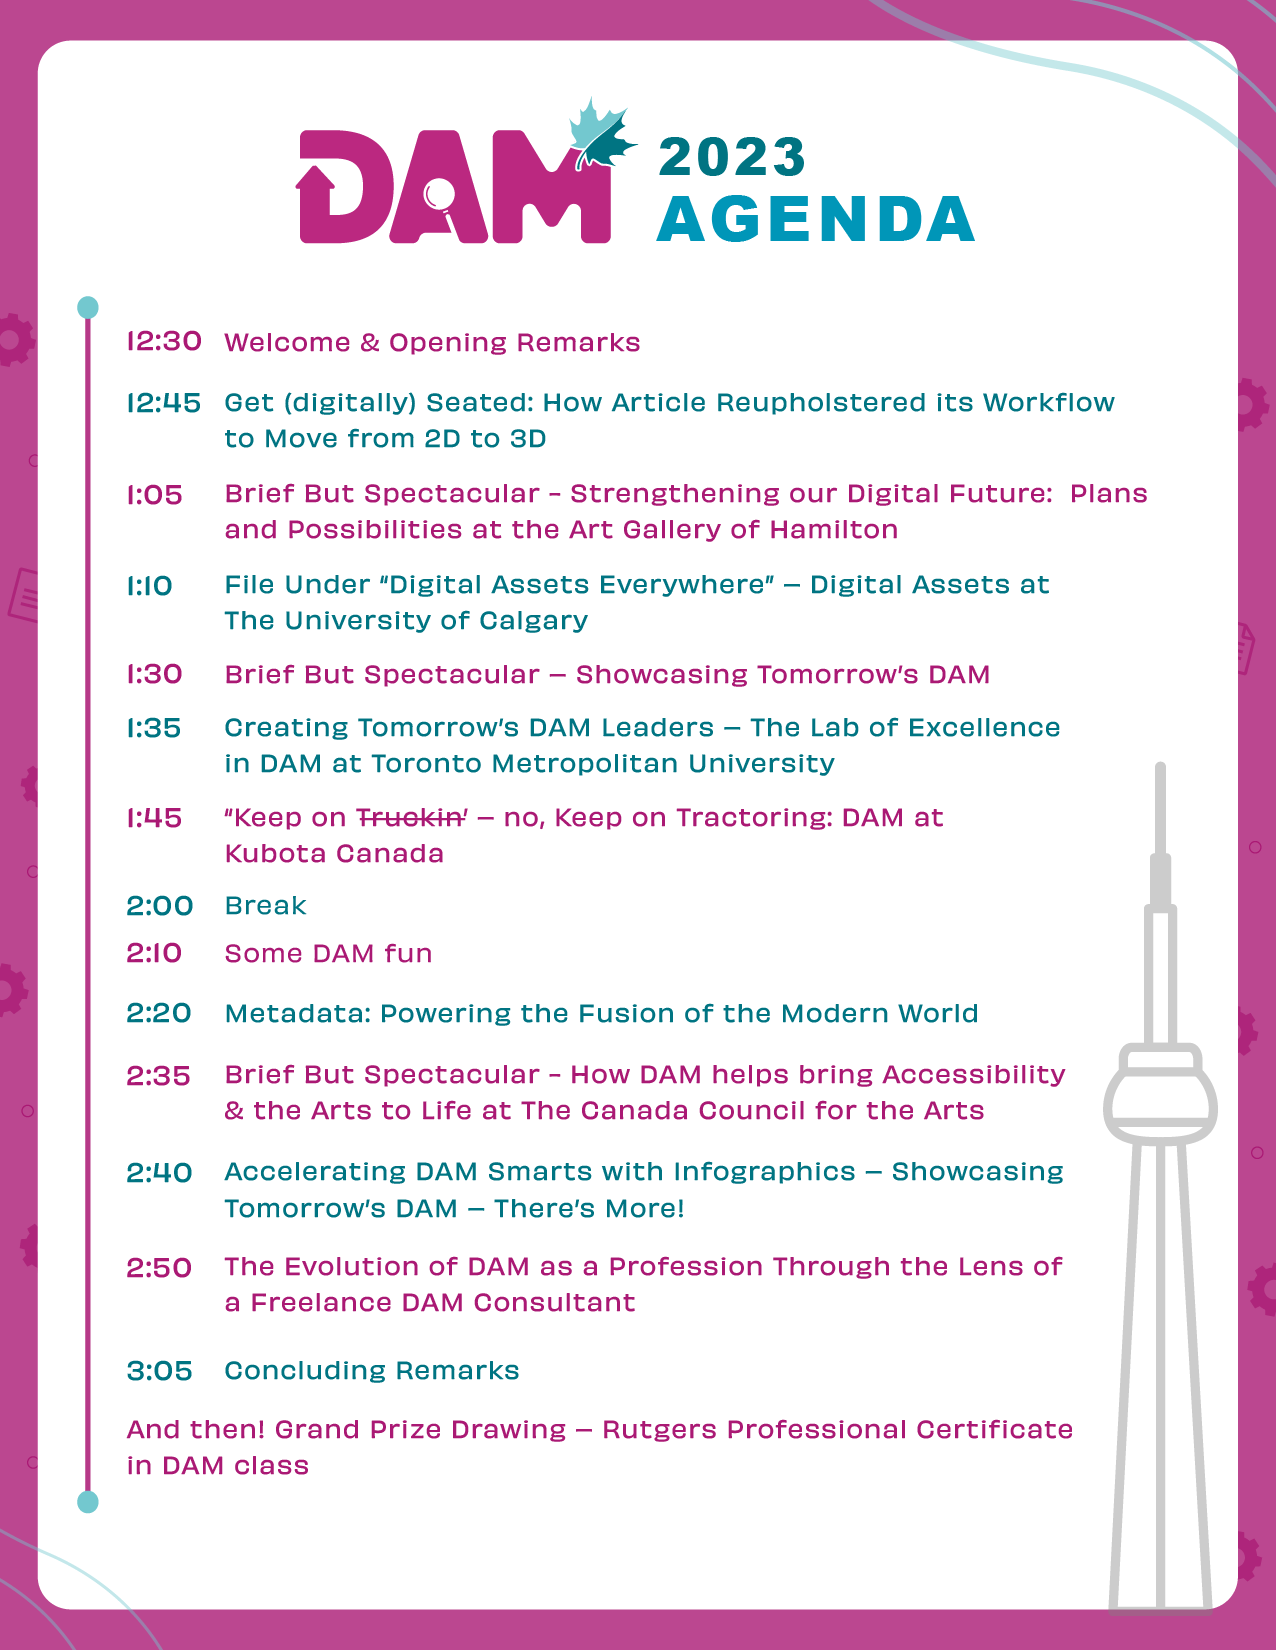 Schedule for DAM 2023 Conference